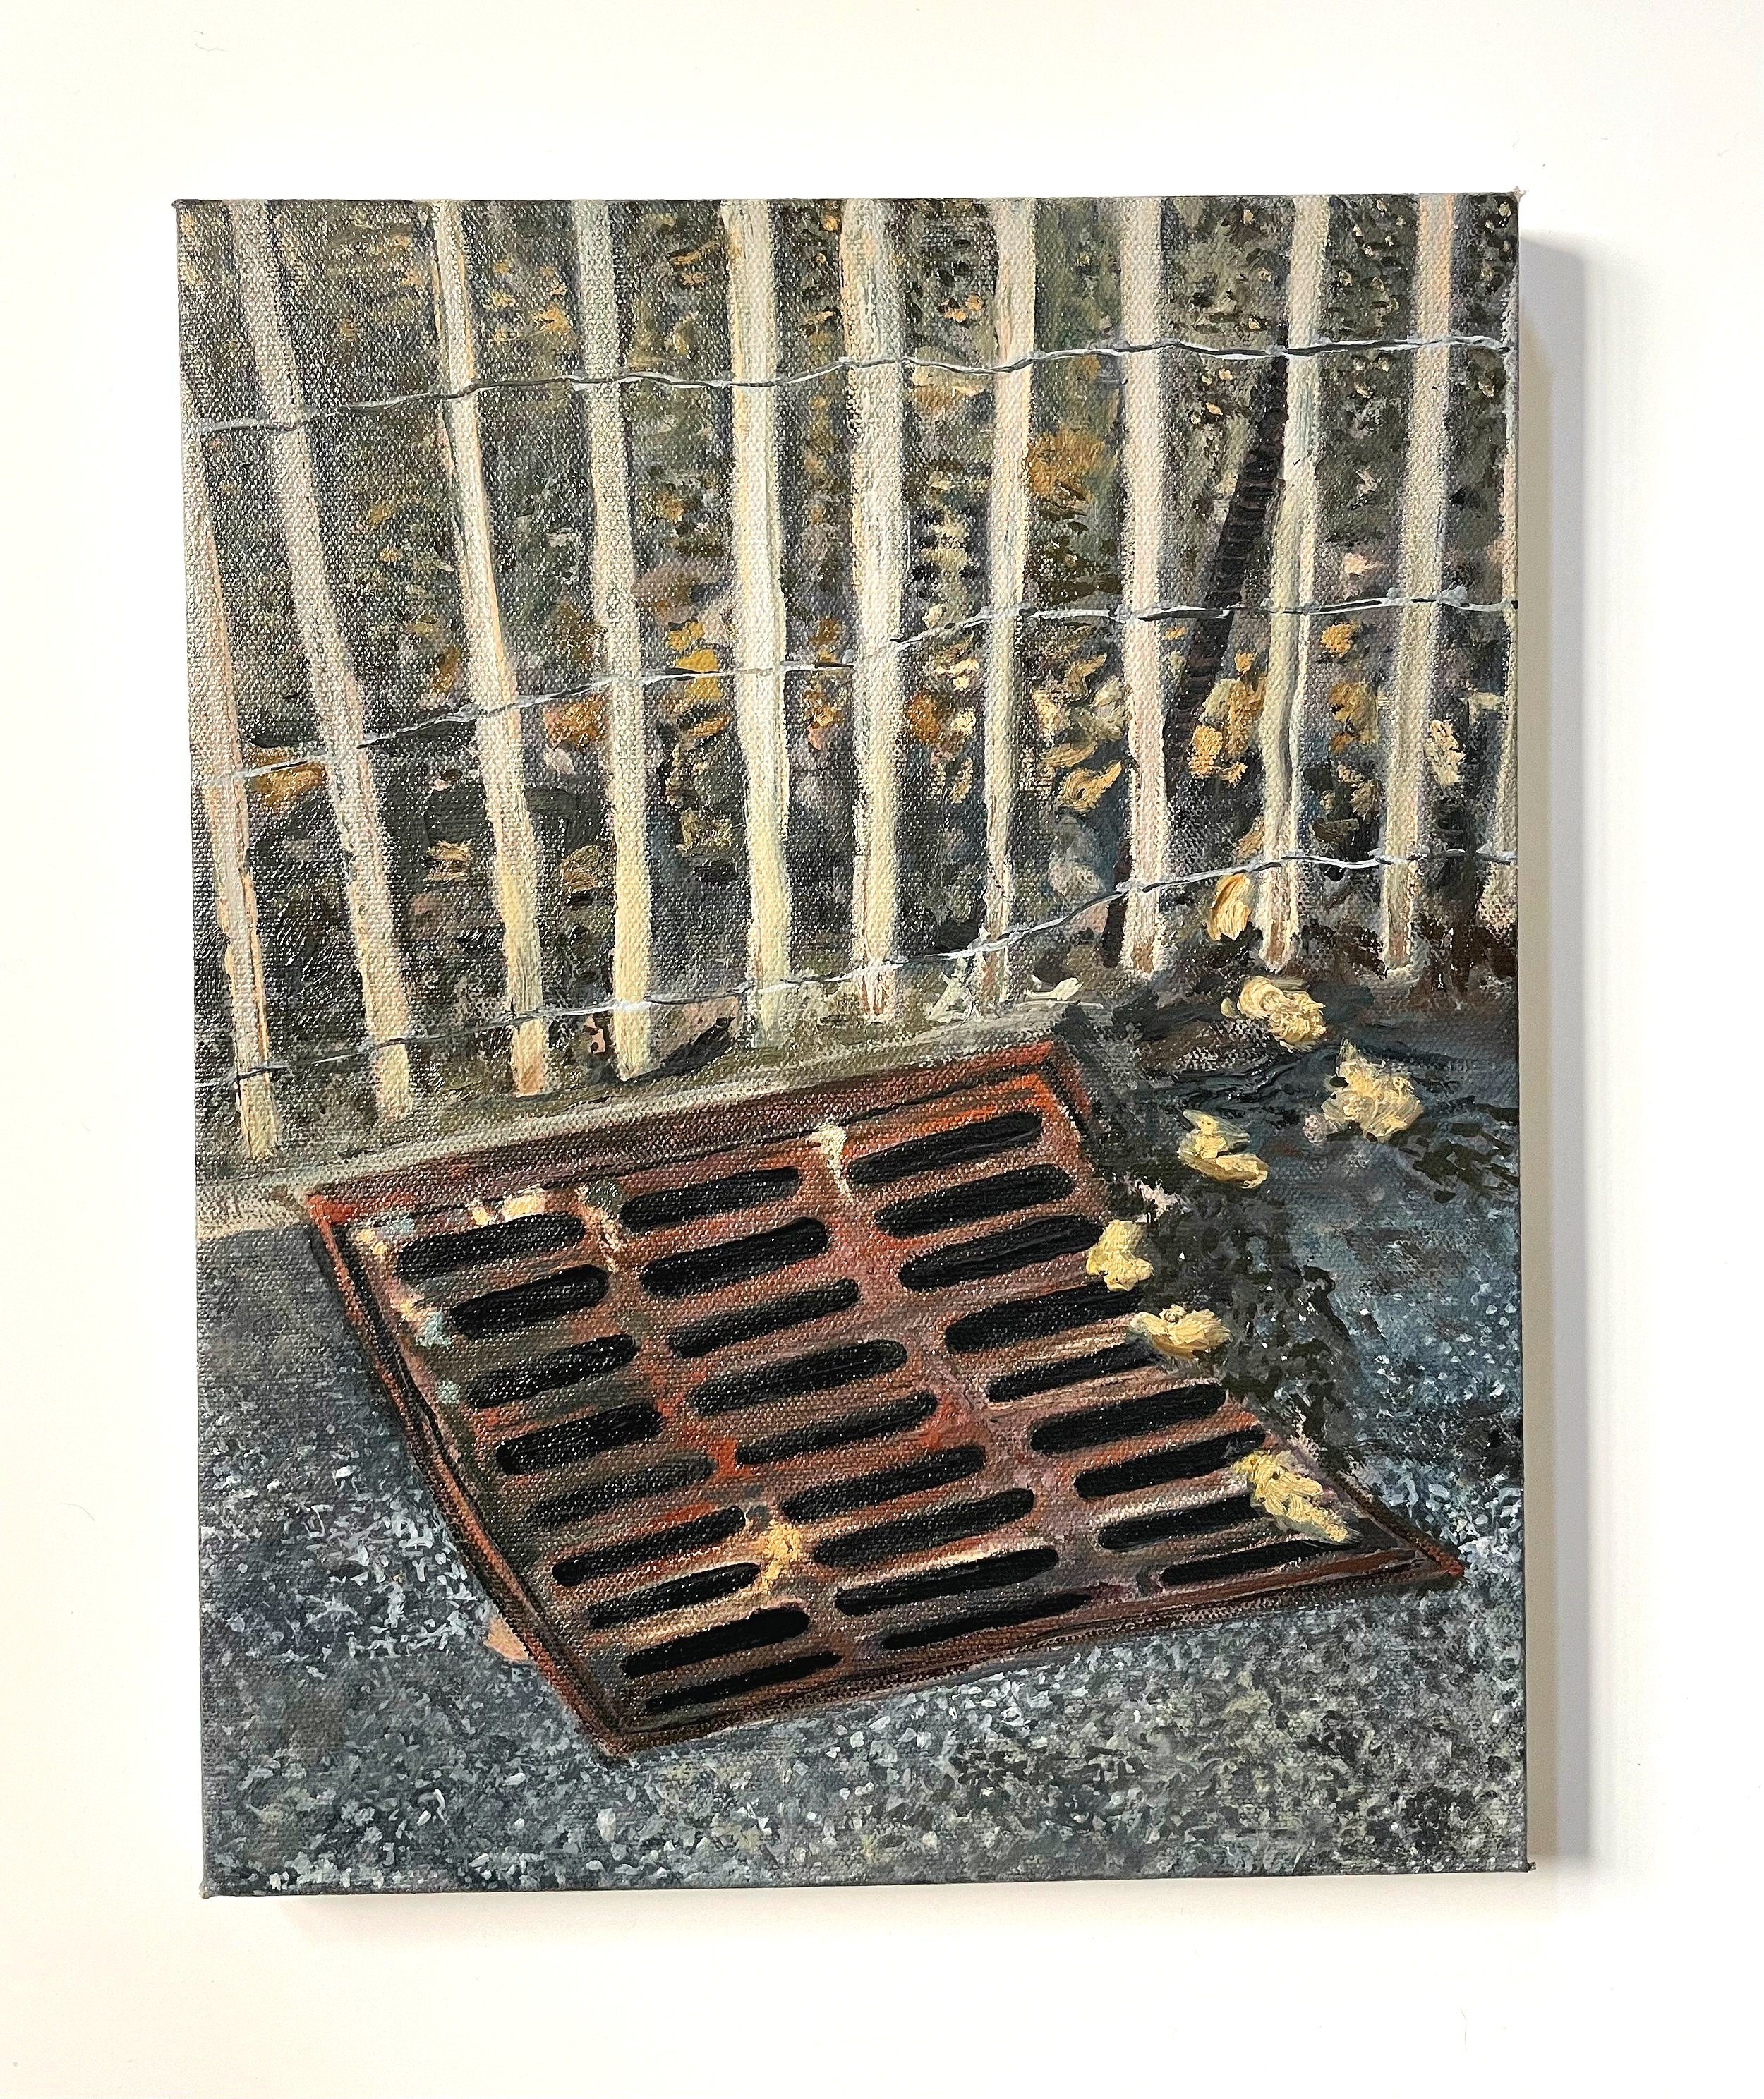   Curved Storm Drain   oil on canvas  14” x 11”  2023 